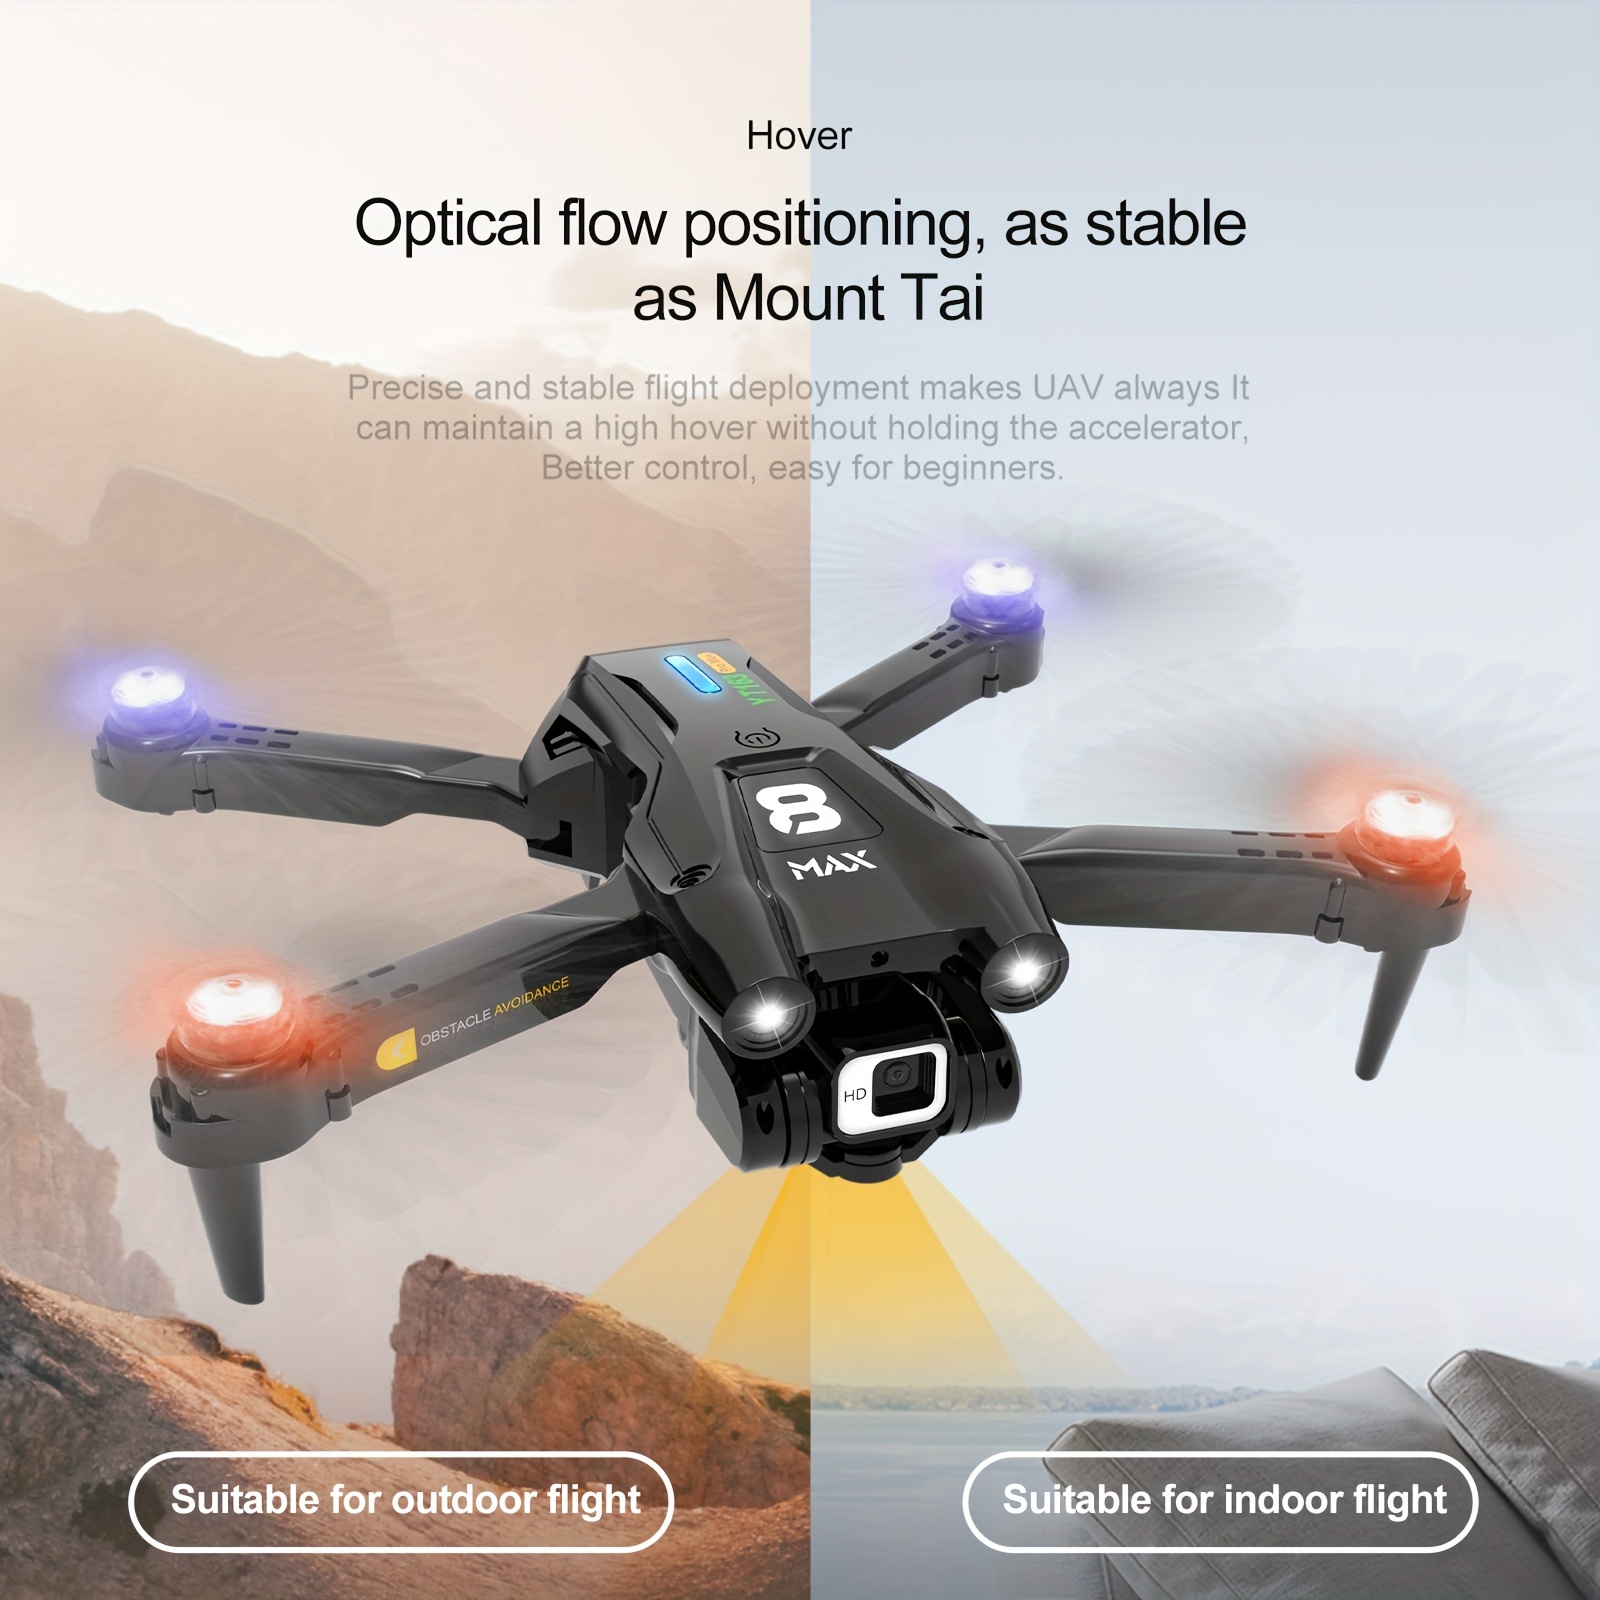 yt163 foldable drone remote control and app control easy to carry four sided sensor obstacle avoidance stable flight one key return high definition camera camera angle adjustable drone details 11